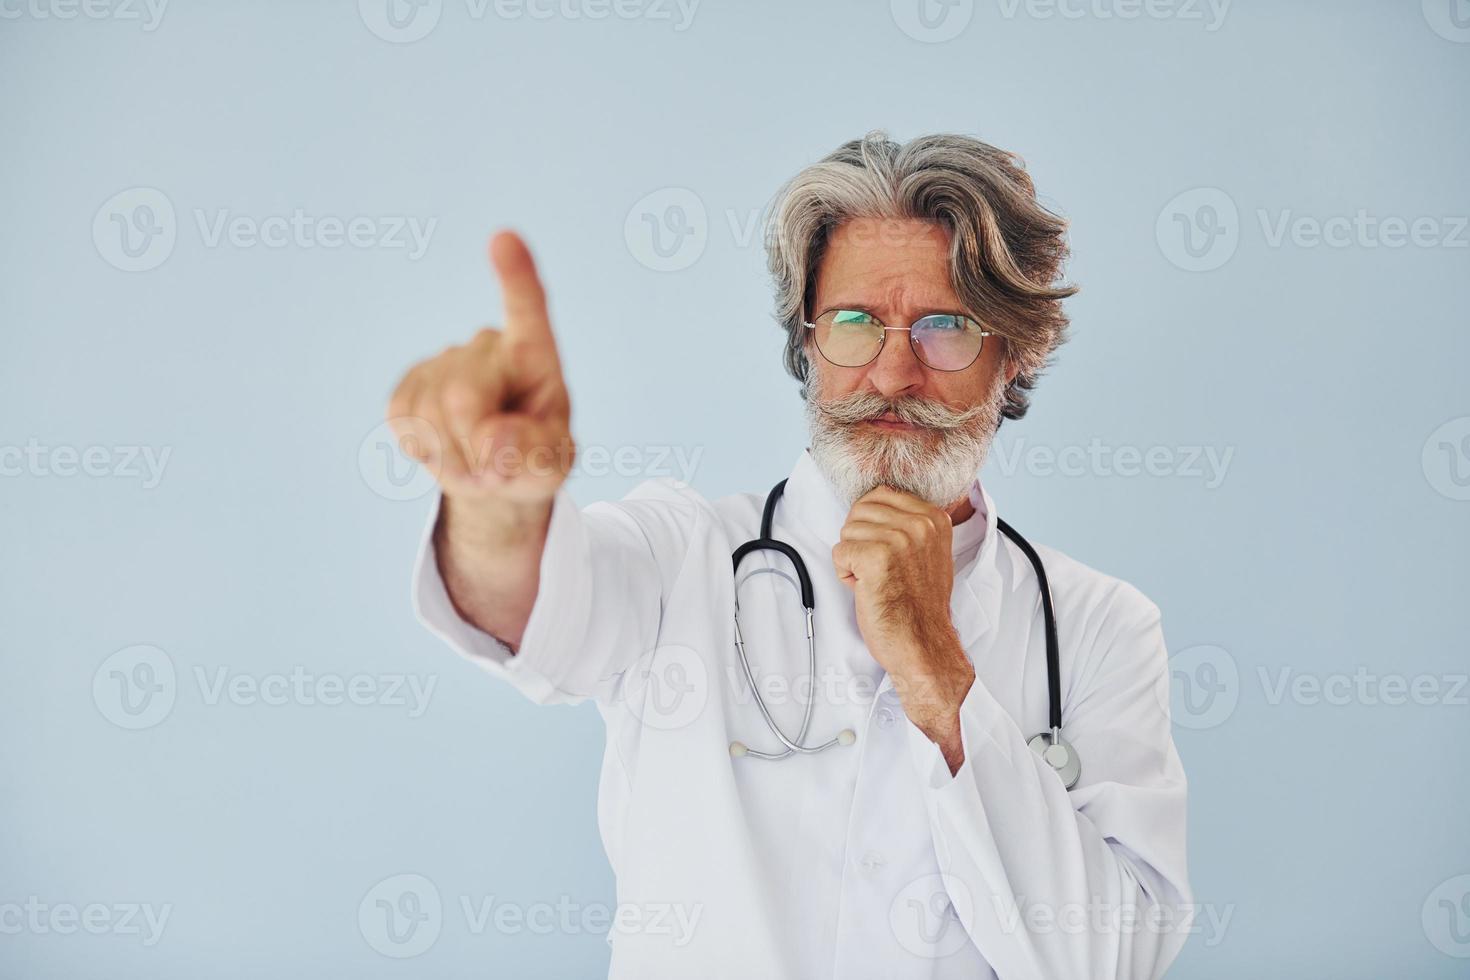 Showing something by finger. Medical worker in coat. Senior stylish modern man with grey hair and beard indoors photo